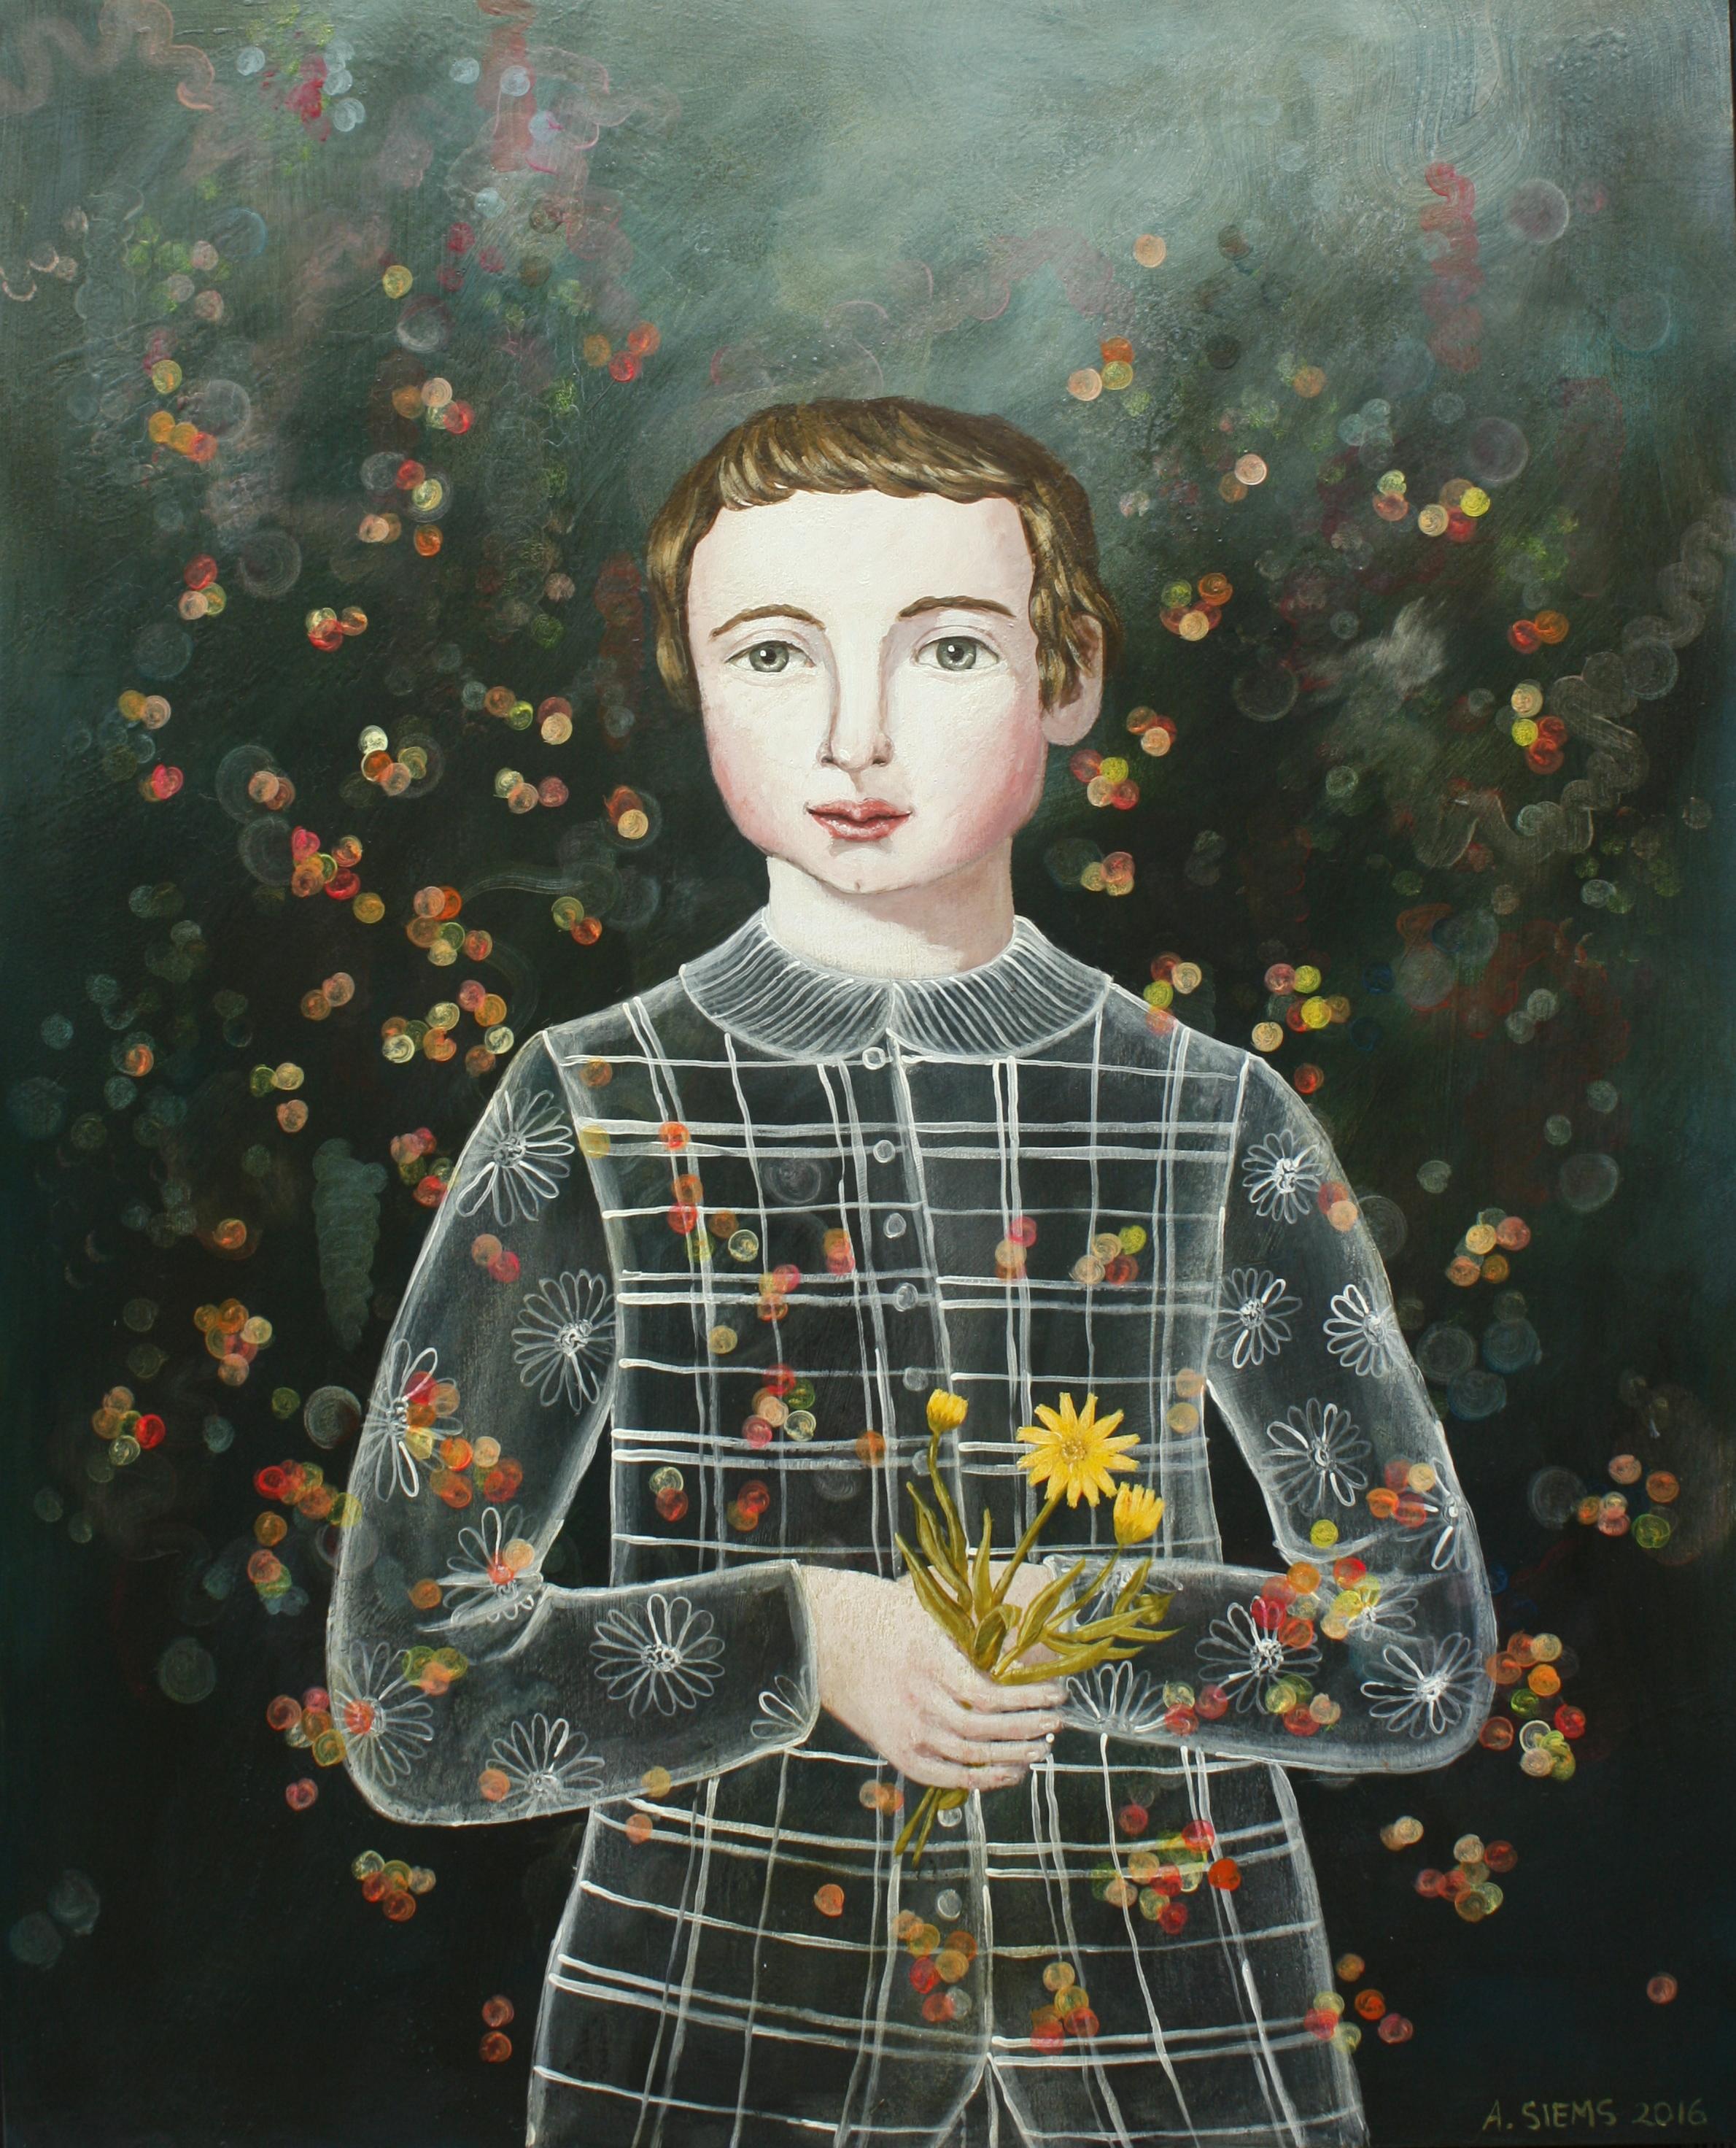 "Boy with Calen" by Anne Siems, Surreal figurative painting, boy with flowers